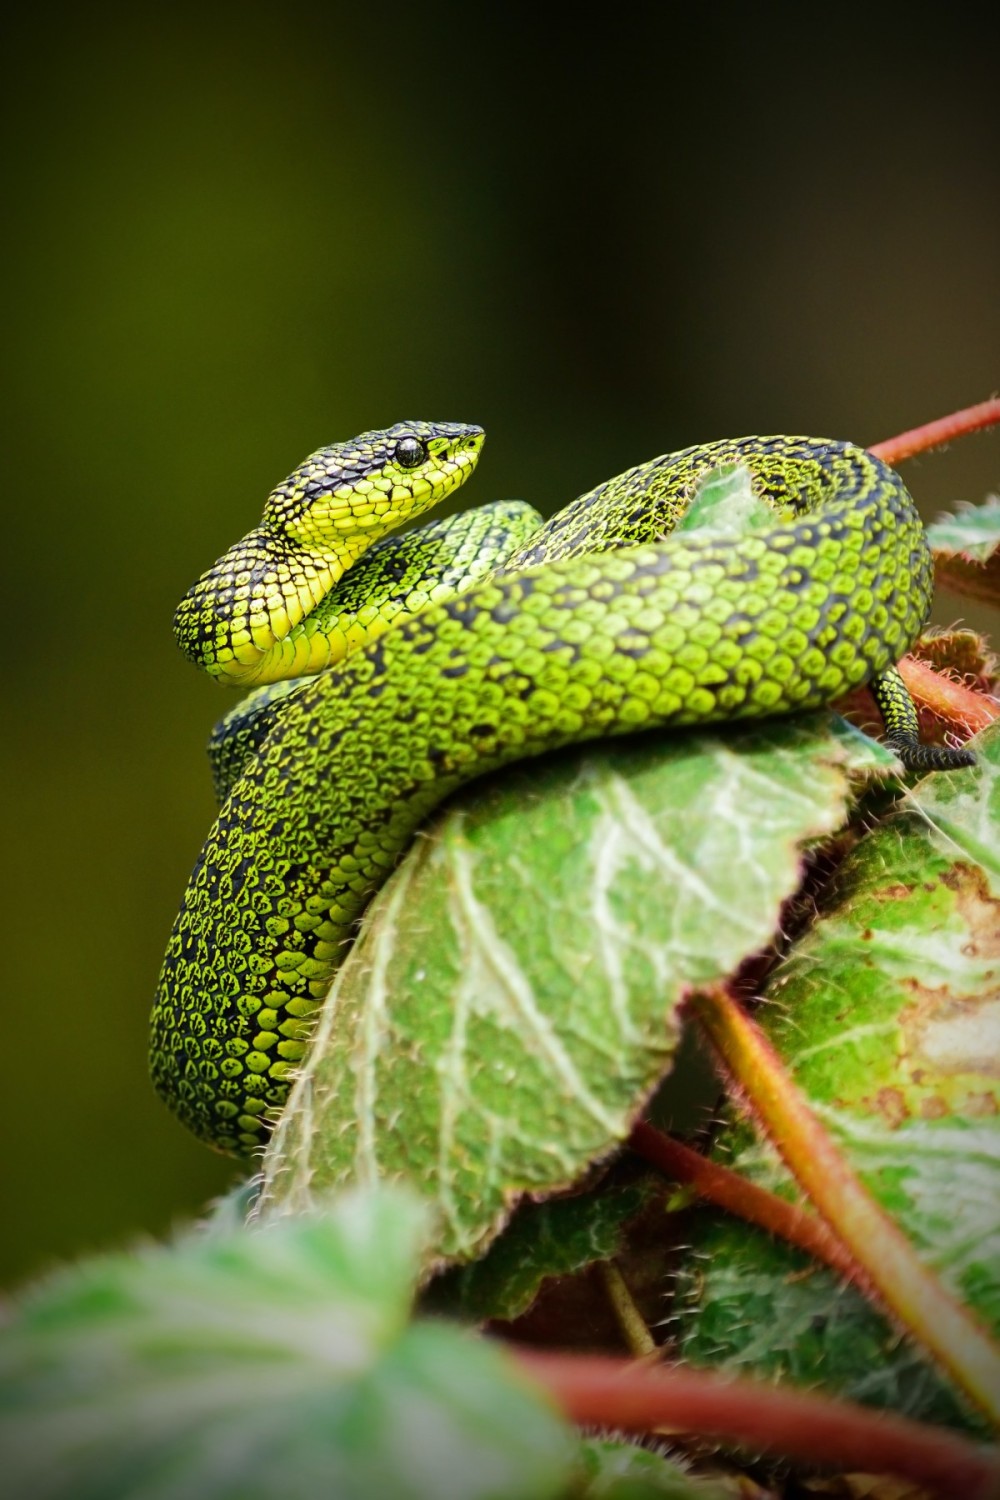 10 cool facts about snakes | World Animal Protection